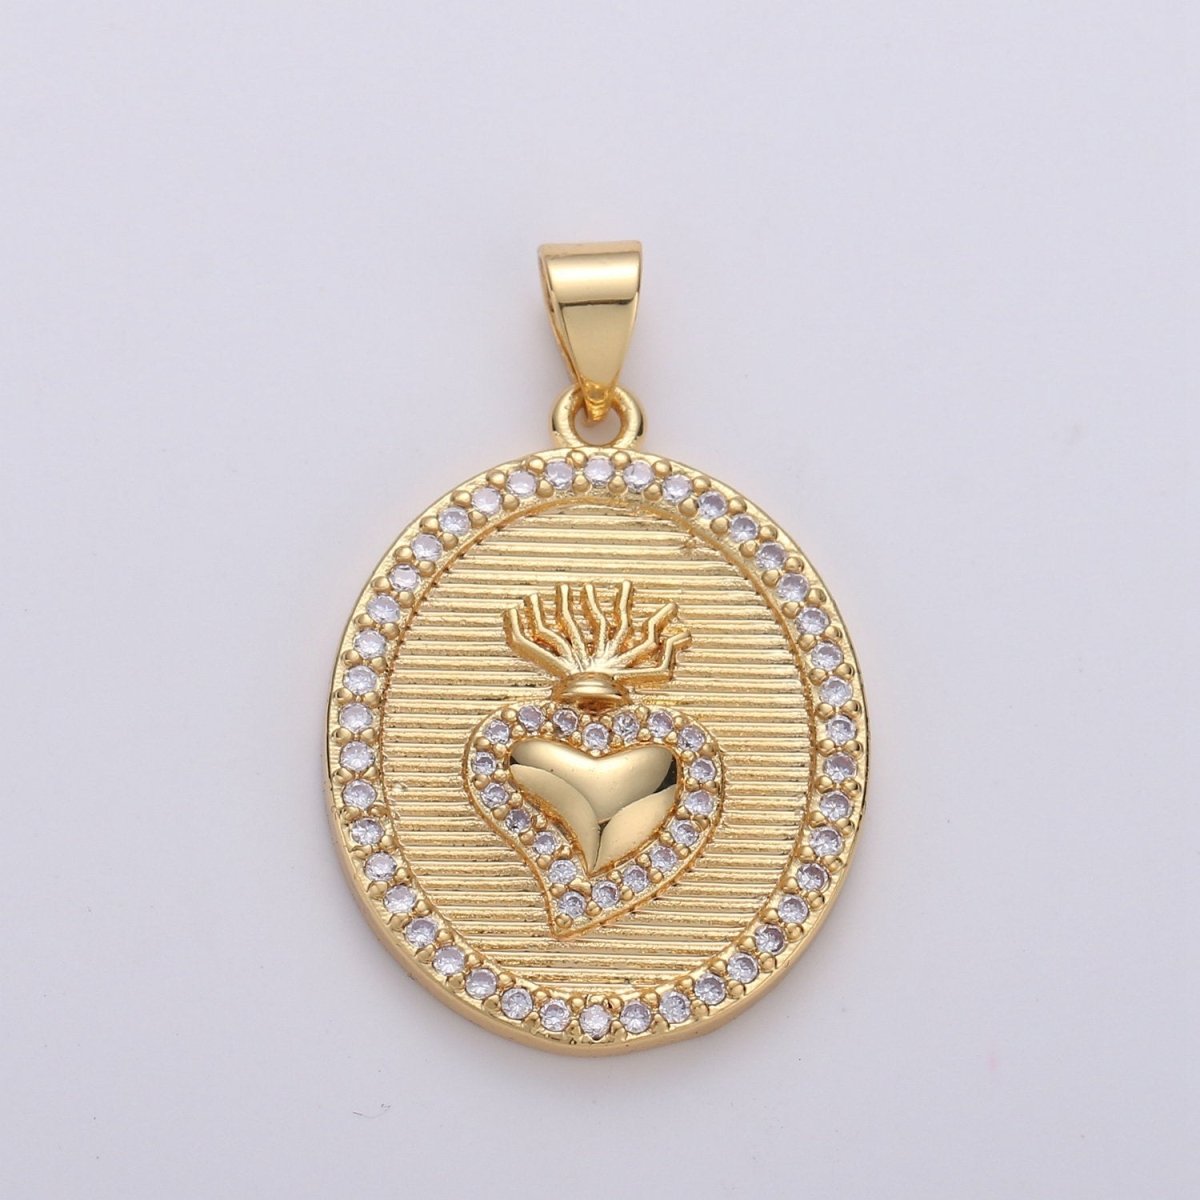 30x20mm 24k Gold Fill Milagro Heart charm, micro pave heart, Medallion heart charms pendant, Sacred Heart Charm bracelet necklace component I-624 - DLUXCA